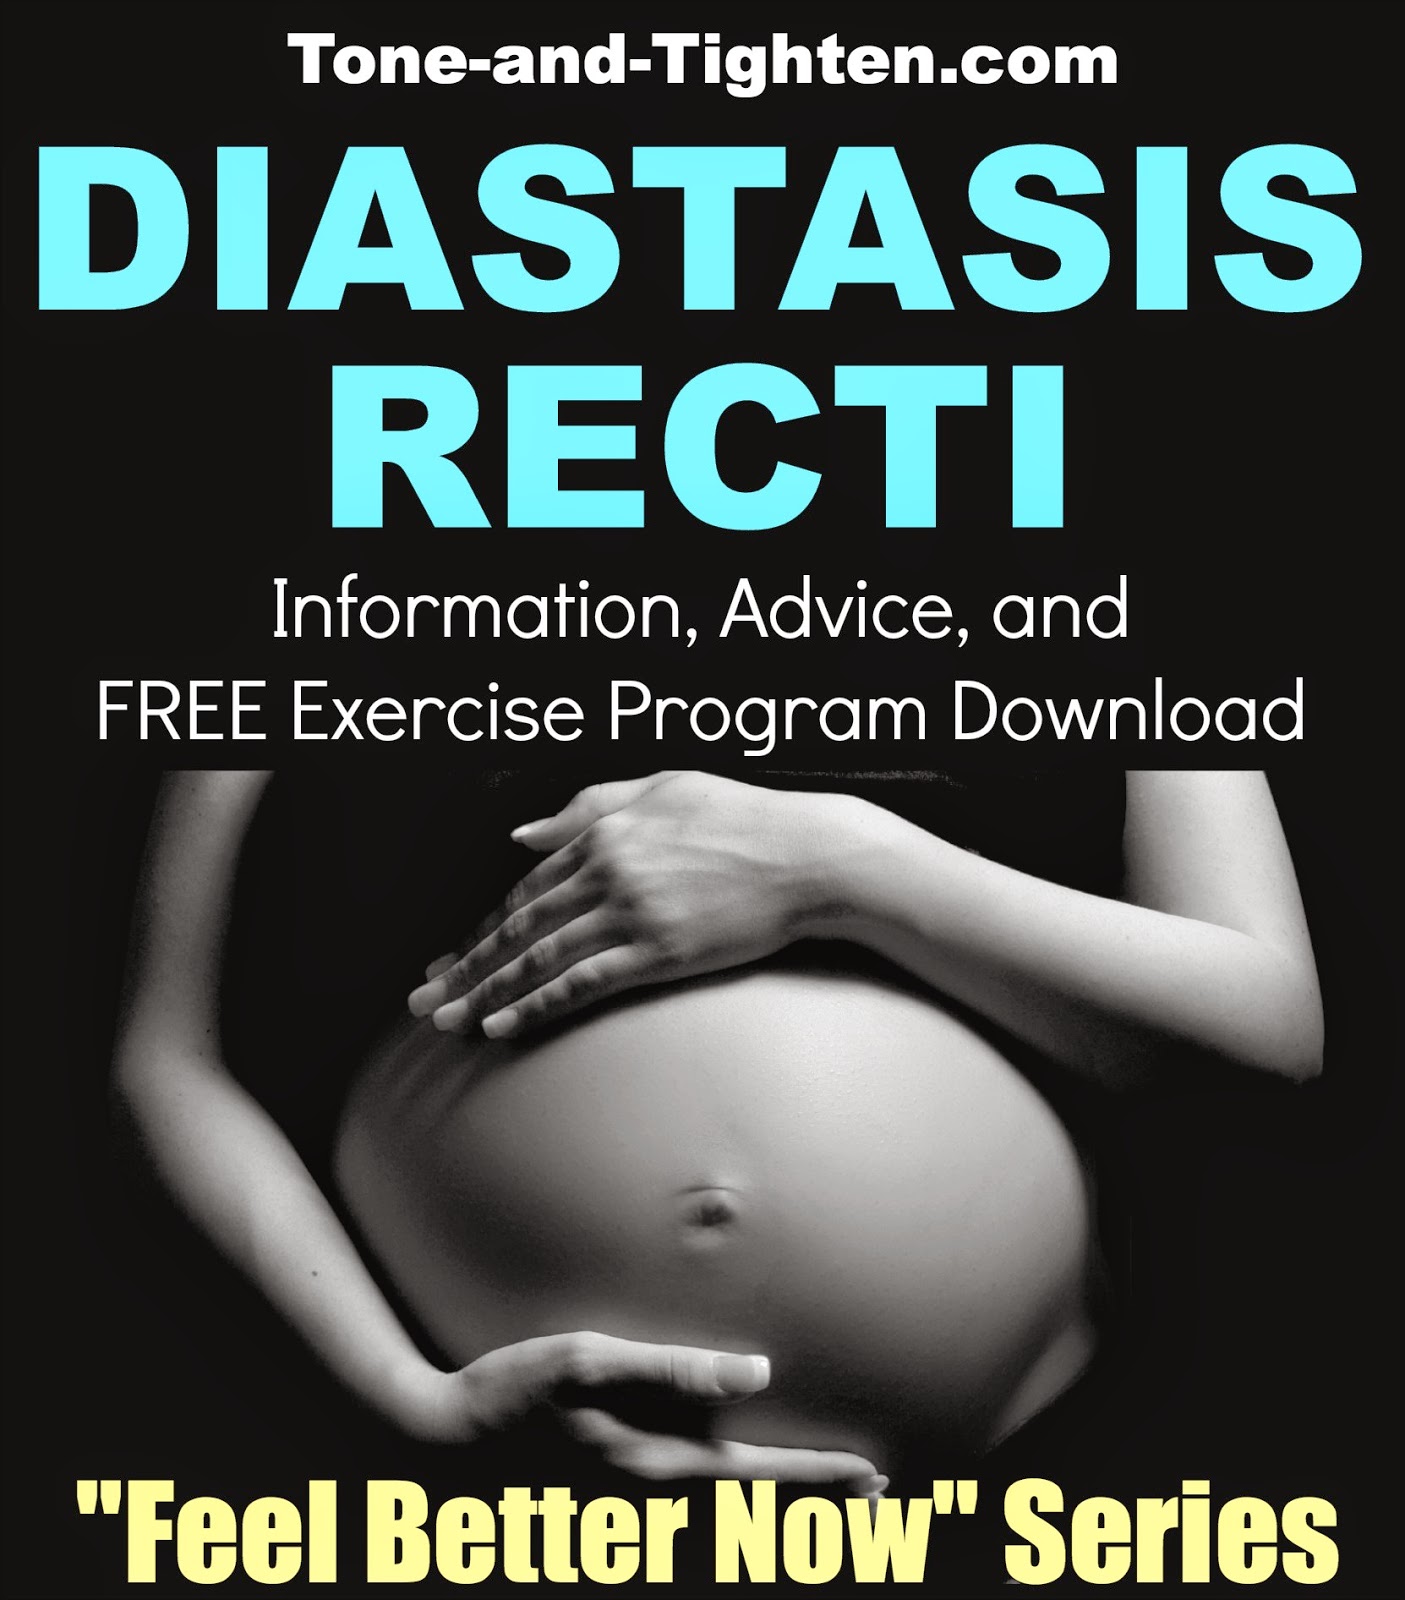 https://tone-and-tighten.com/2014/03/how-to-treat-diastasis-recti-advice-and-exercises-to-help-you-feel-better-now.html